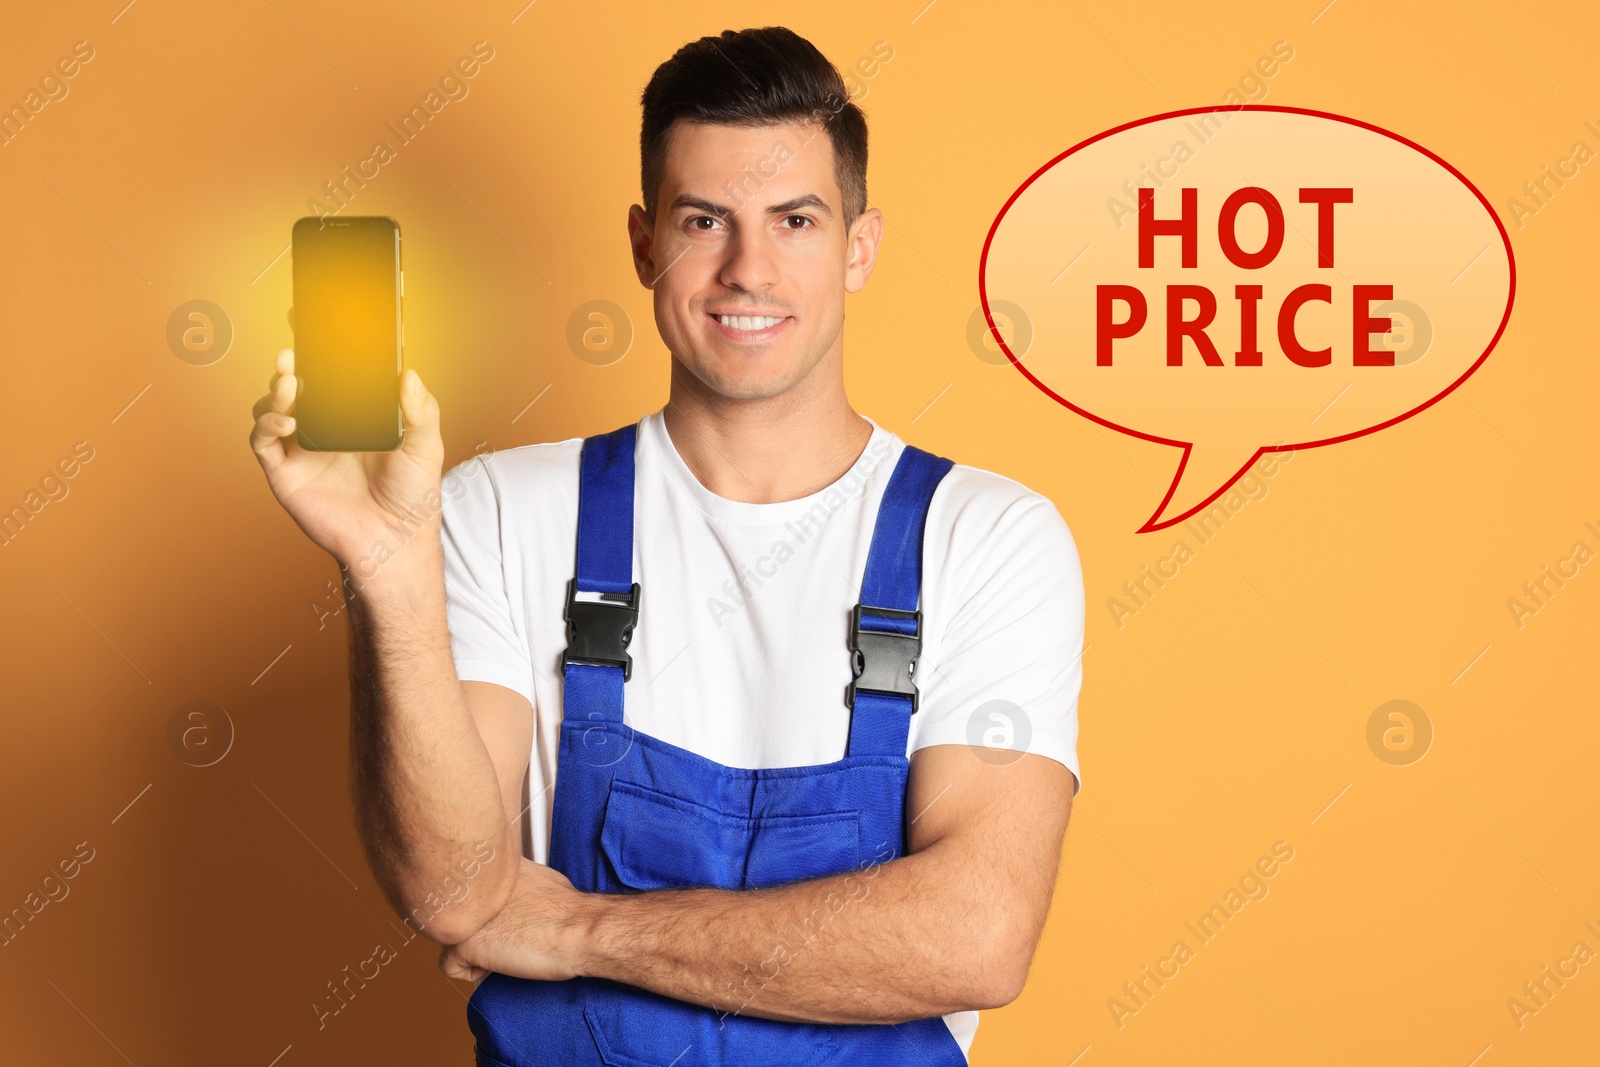 Image of Smartphone repairing by hot price. Man with mobile phone on orange background